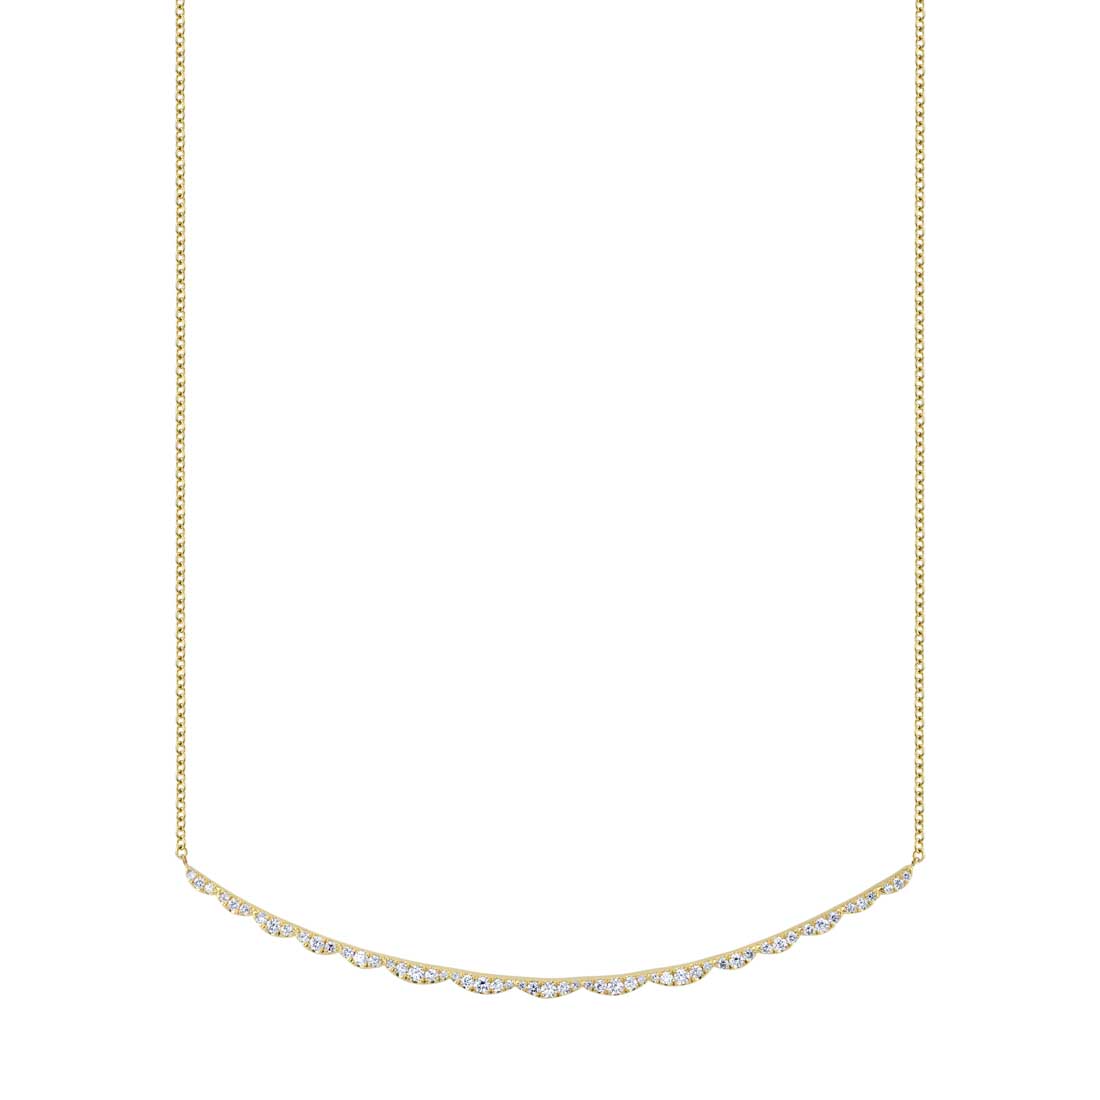 Yellow Gold Vintage Inspired Scalloped Diamond Necklace